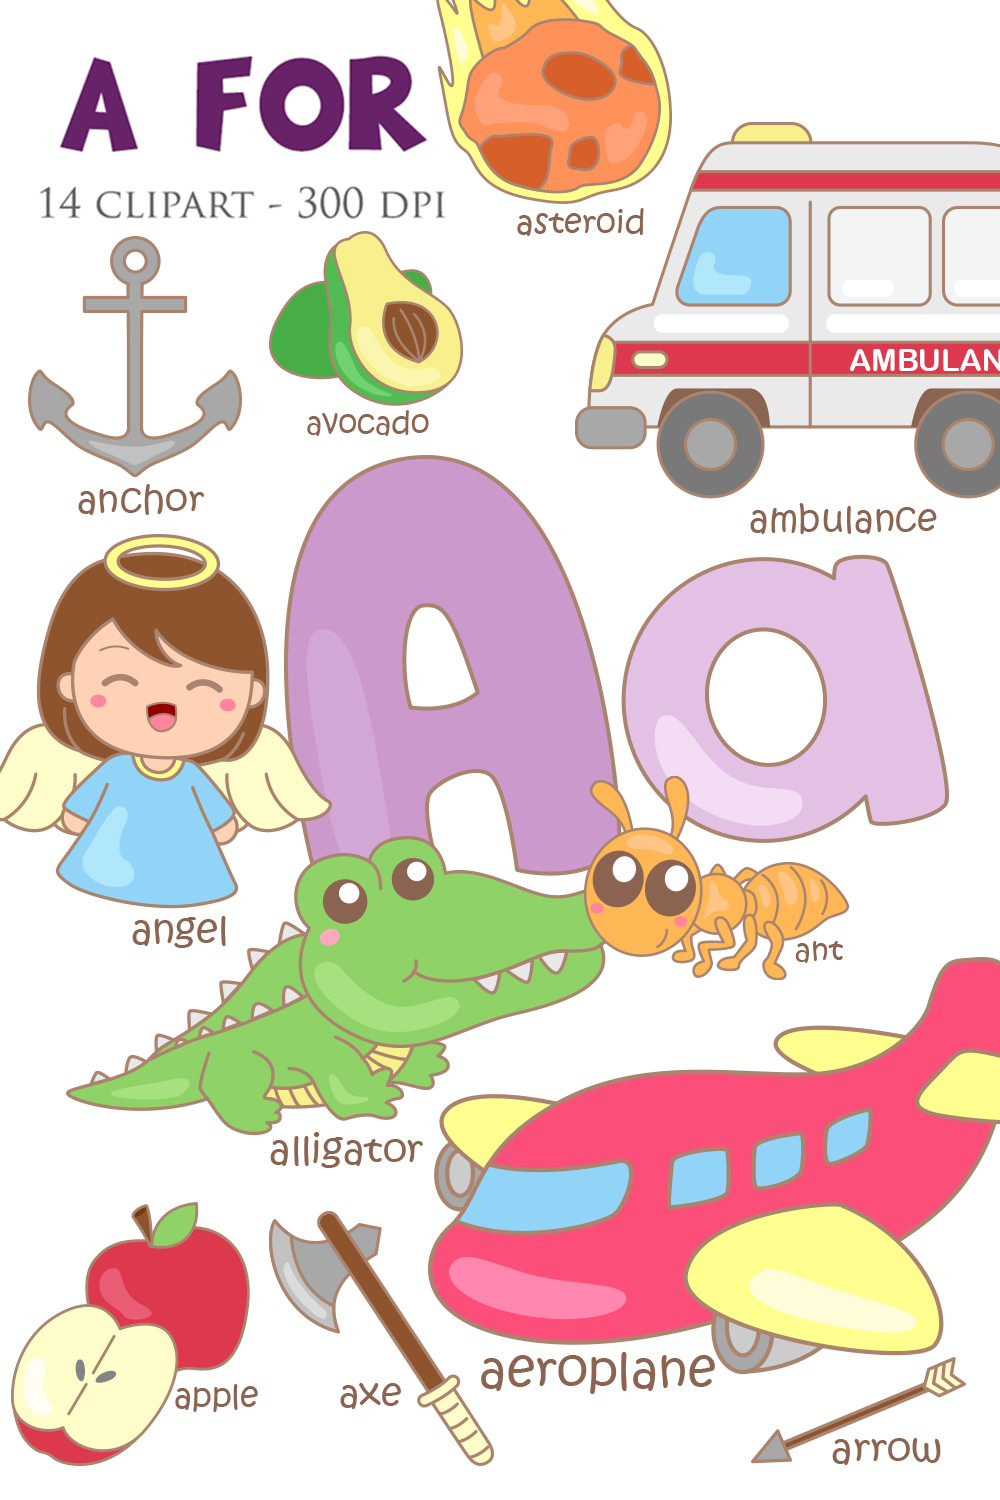 A For Vocabulary School Letter Reading Writing Font Study Learning Student Toodler Kids Angel Avocado Anchor Asteroid Ambulance Apple Alligator Ant Alien Cartoon Illustration Vector Clipart pinterest preview image.